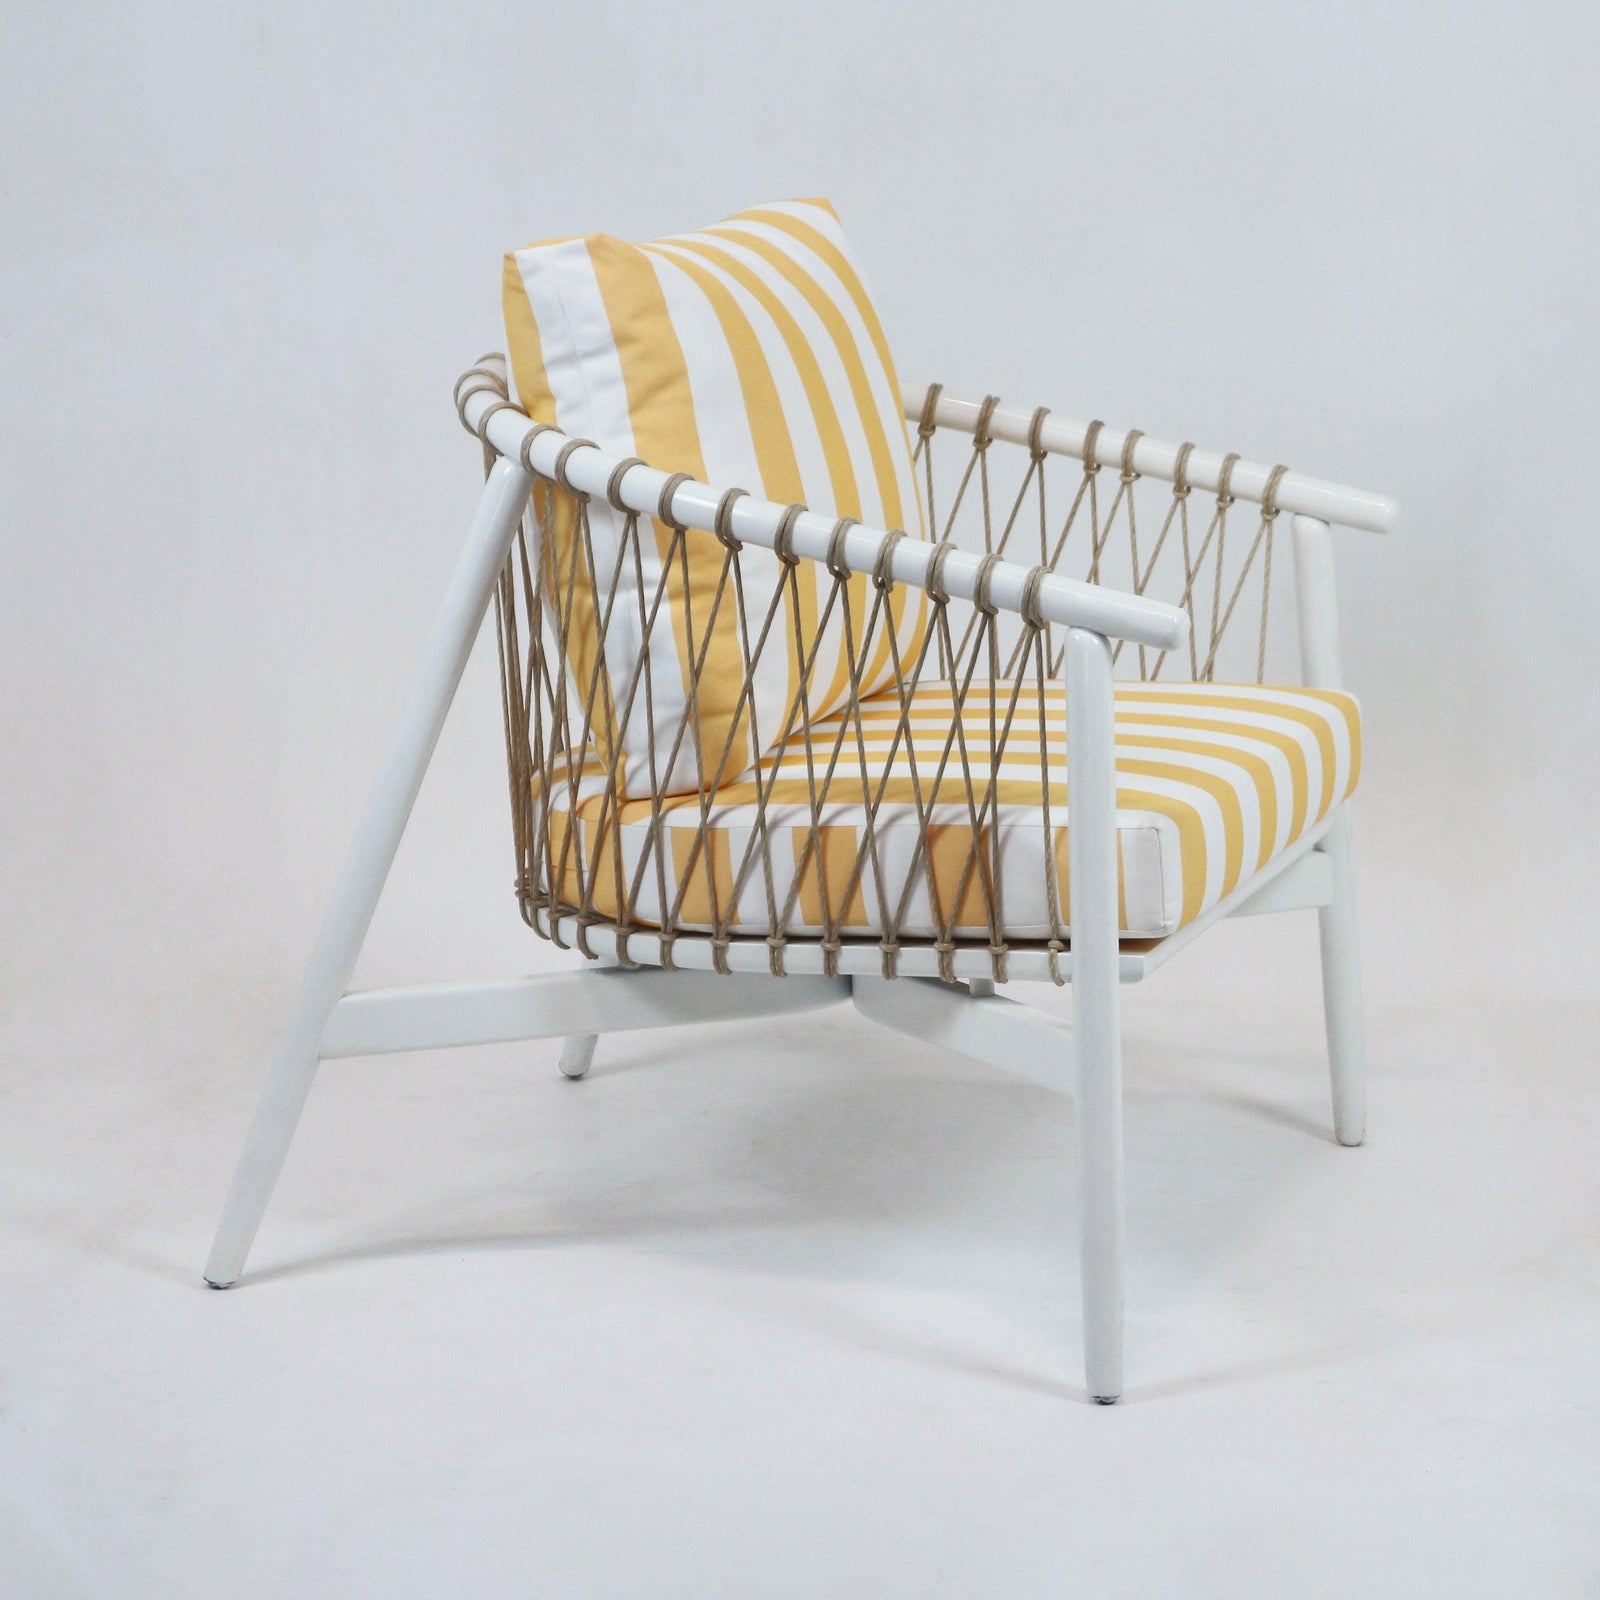 Mevcali Lounge Chair with Summer Stripe Upholstery - INTERIORTONIC